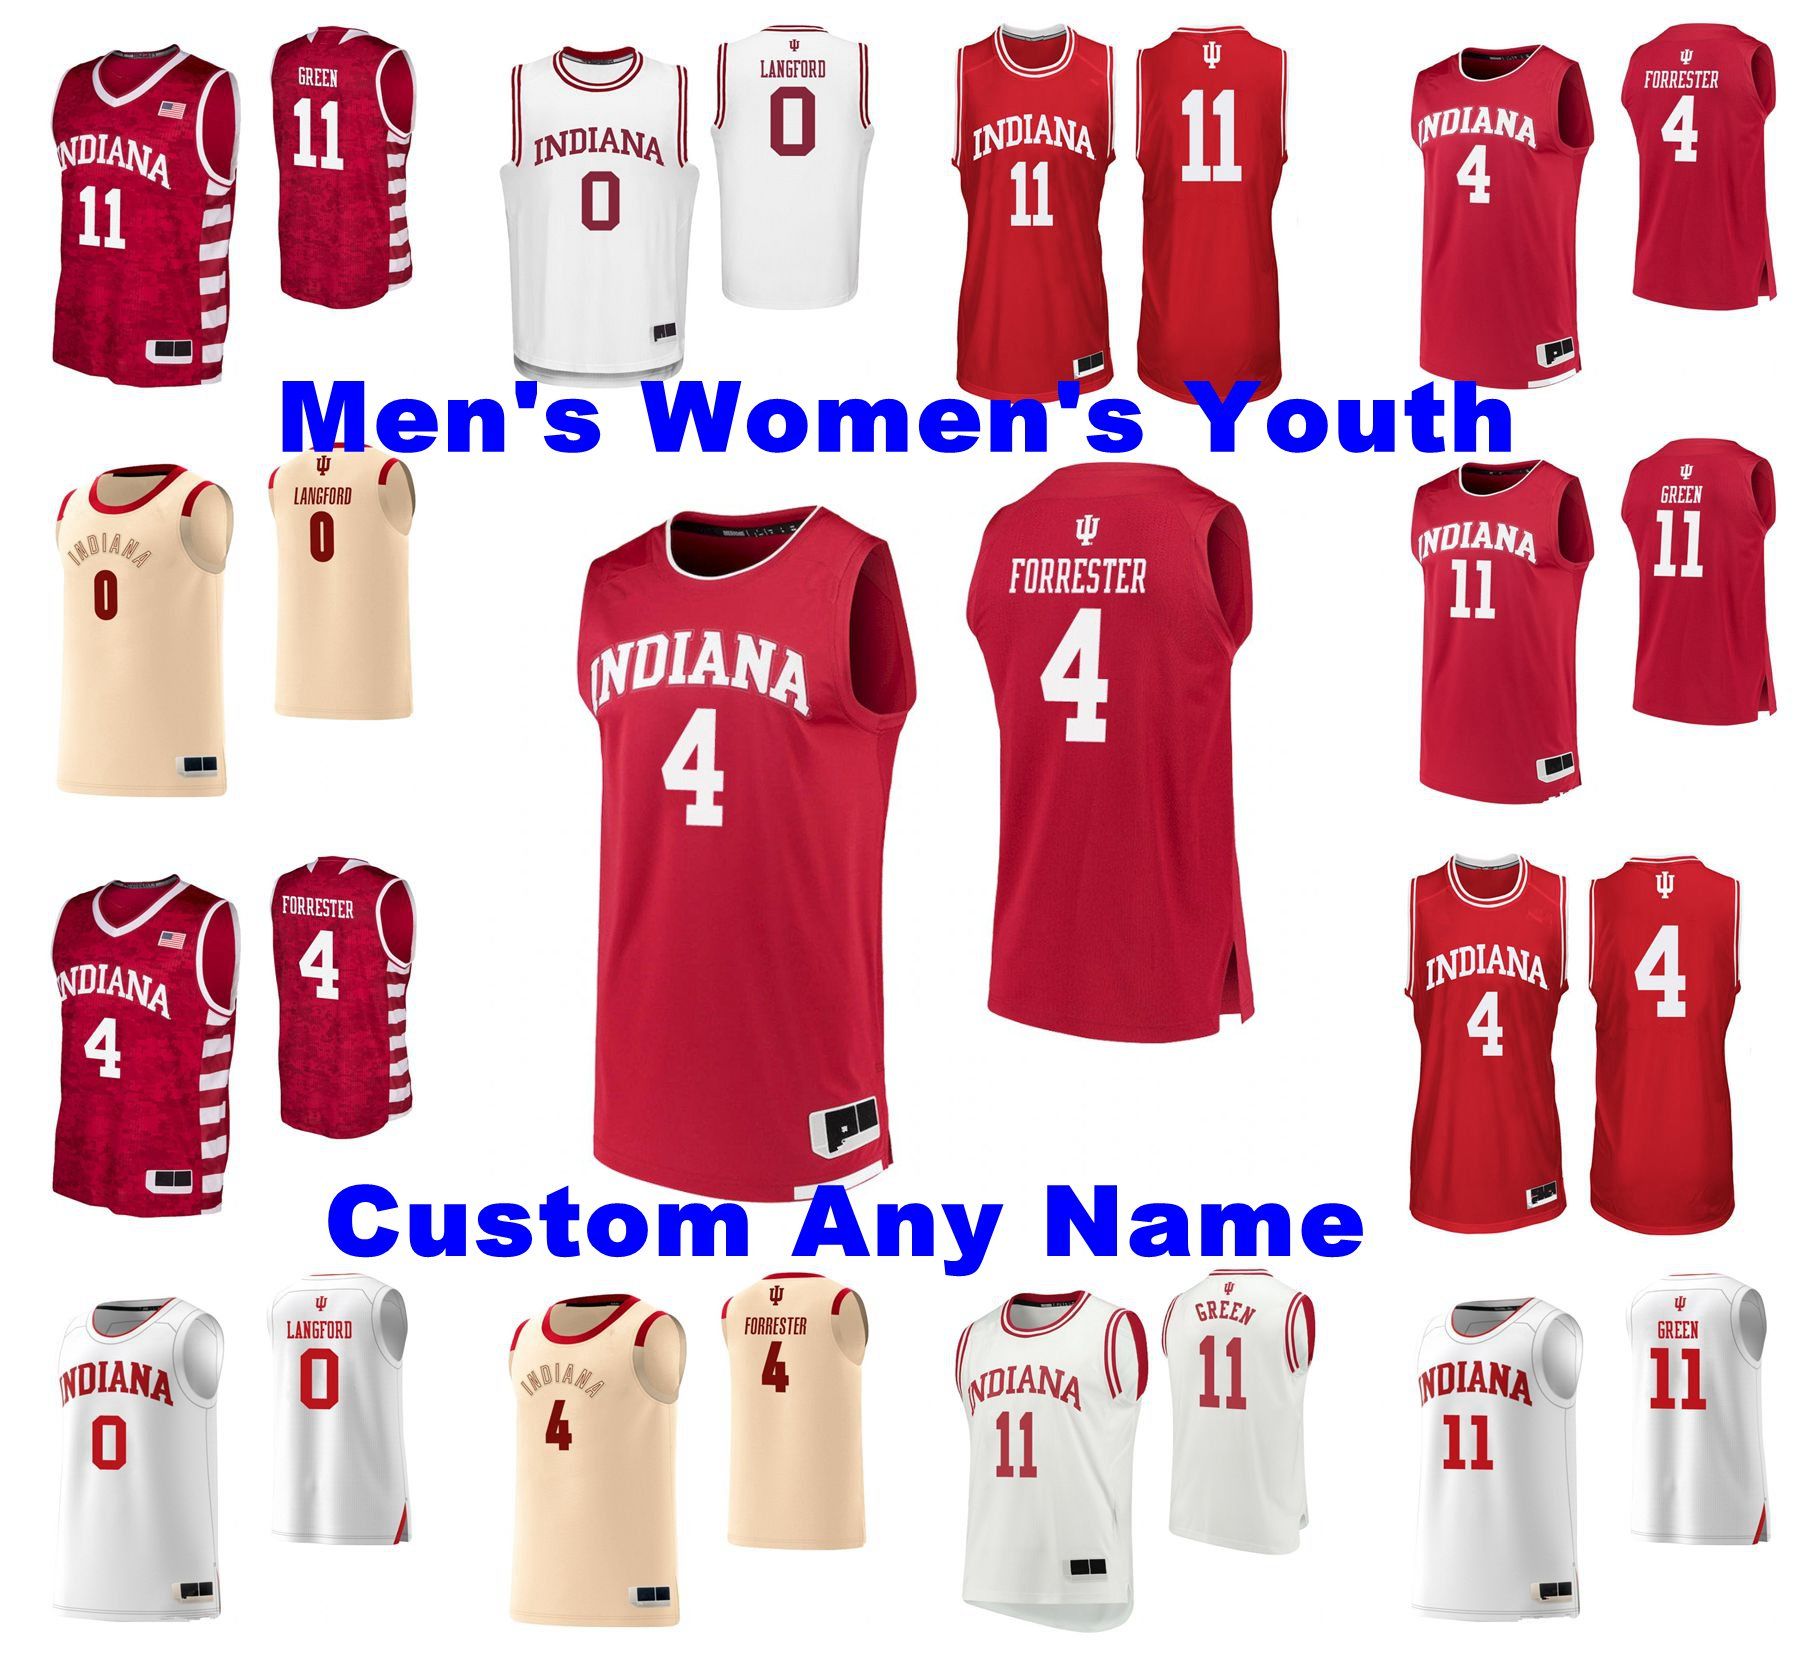 indiana hoosiers basketball jersey youth